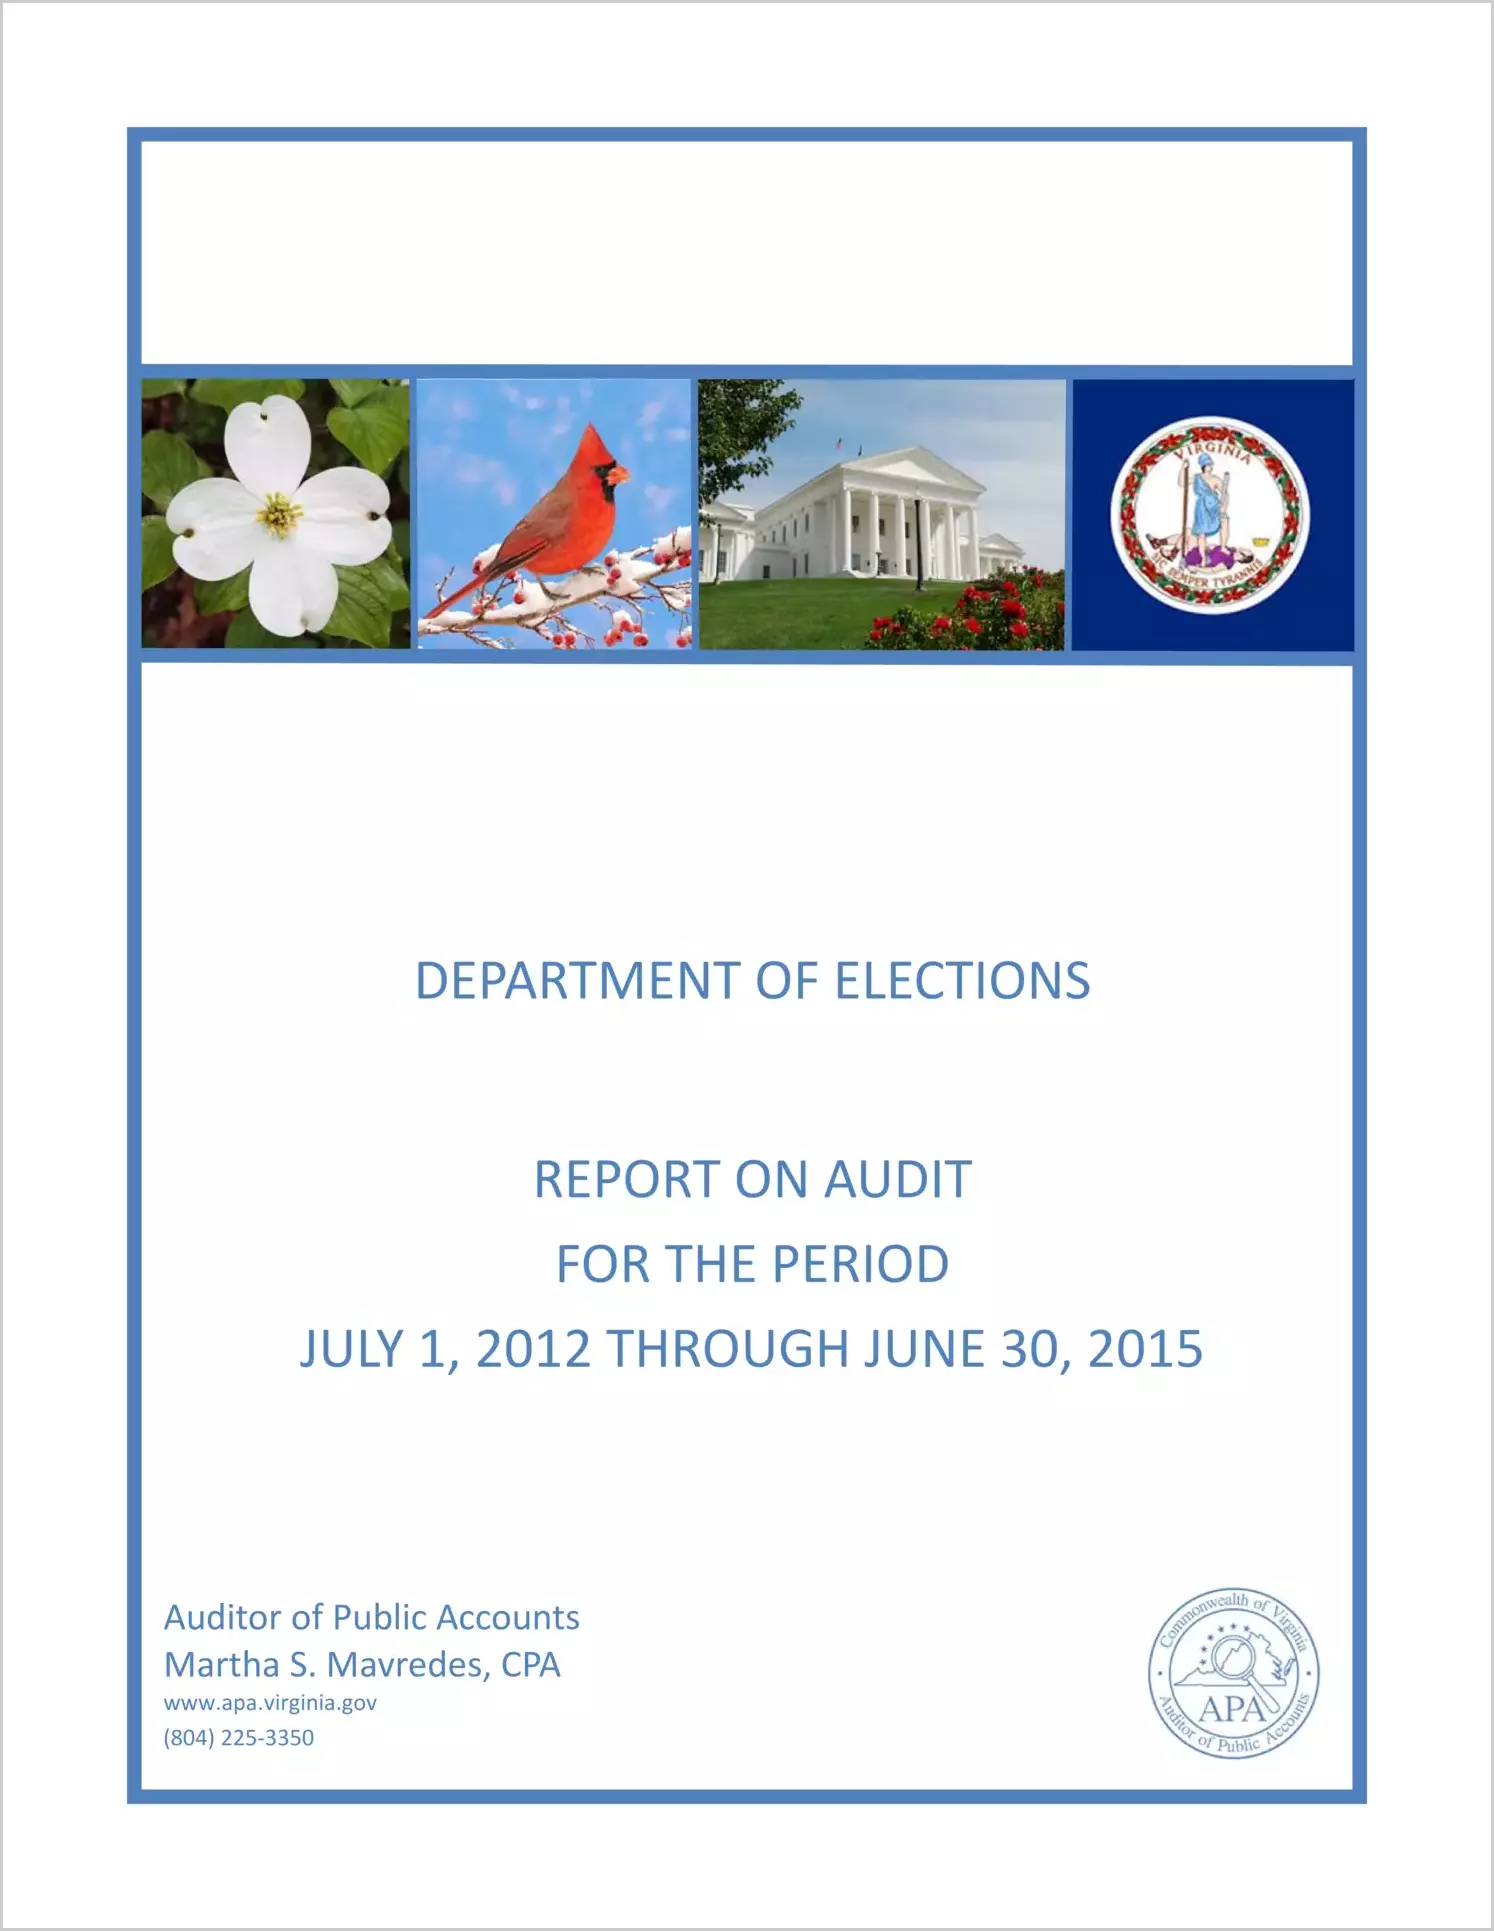 Department of Elections report on audit for the period July 1, 2012 through June 30, 2015